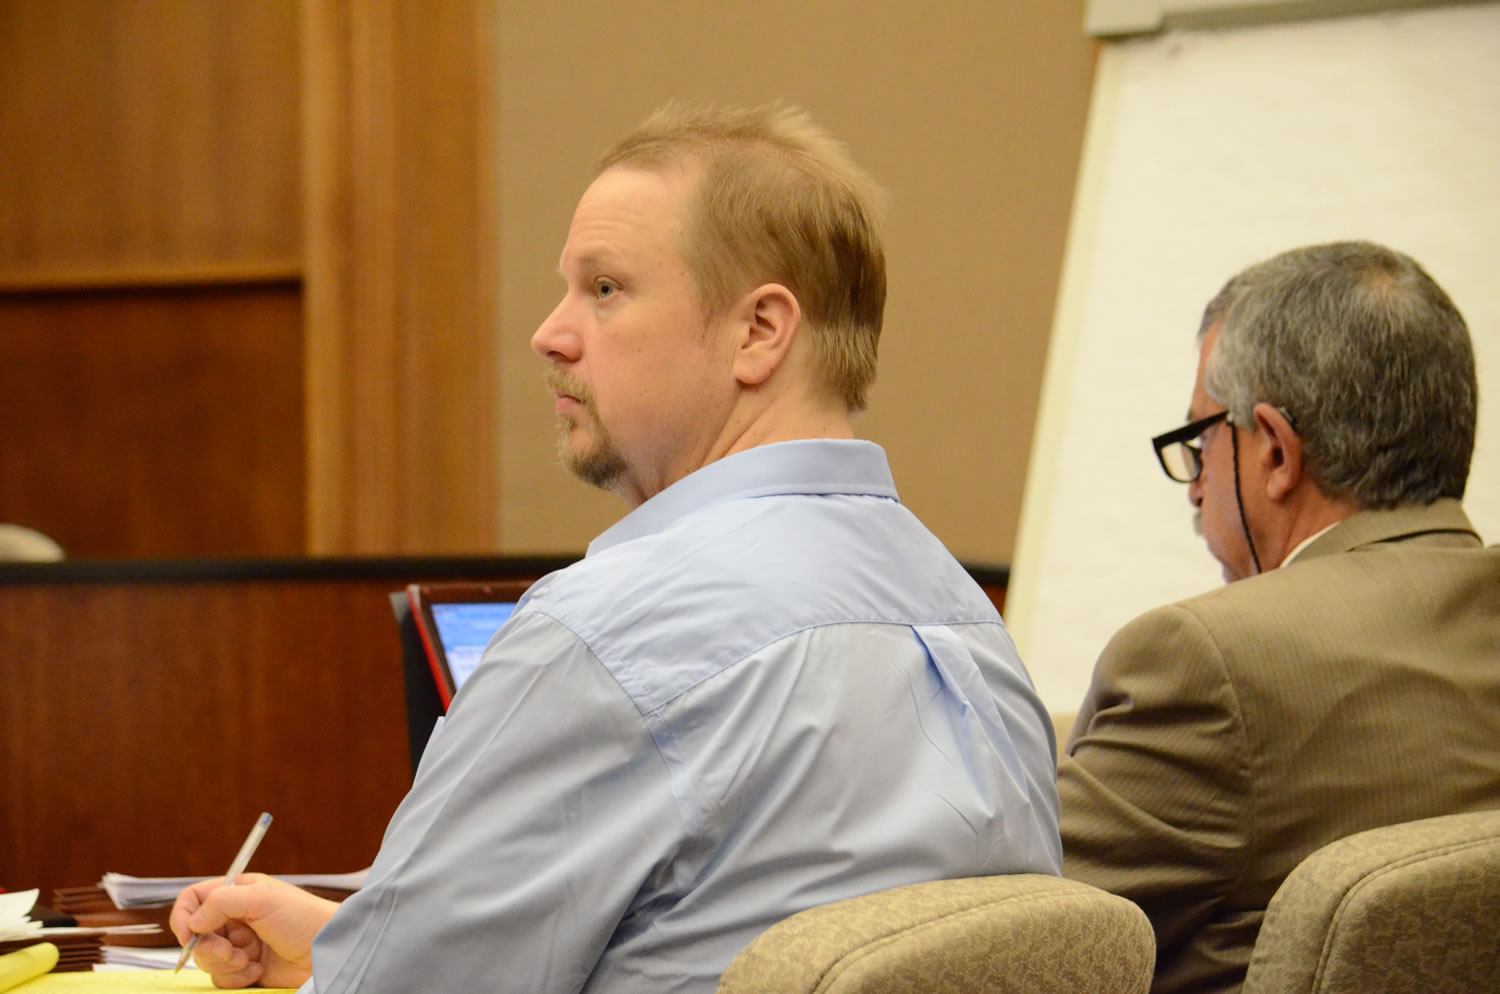 Troy Fisher, accused of killing his father, appeared Tuesday, April 23 in Clark County Superior Court as the defendant passed up a jury trial in favor of a bench trial in which Judge Barbara Johnson will decide his fate.